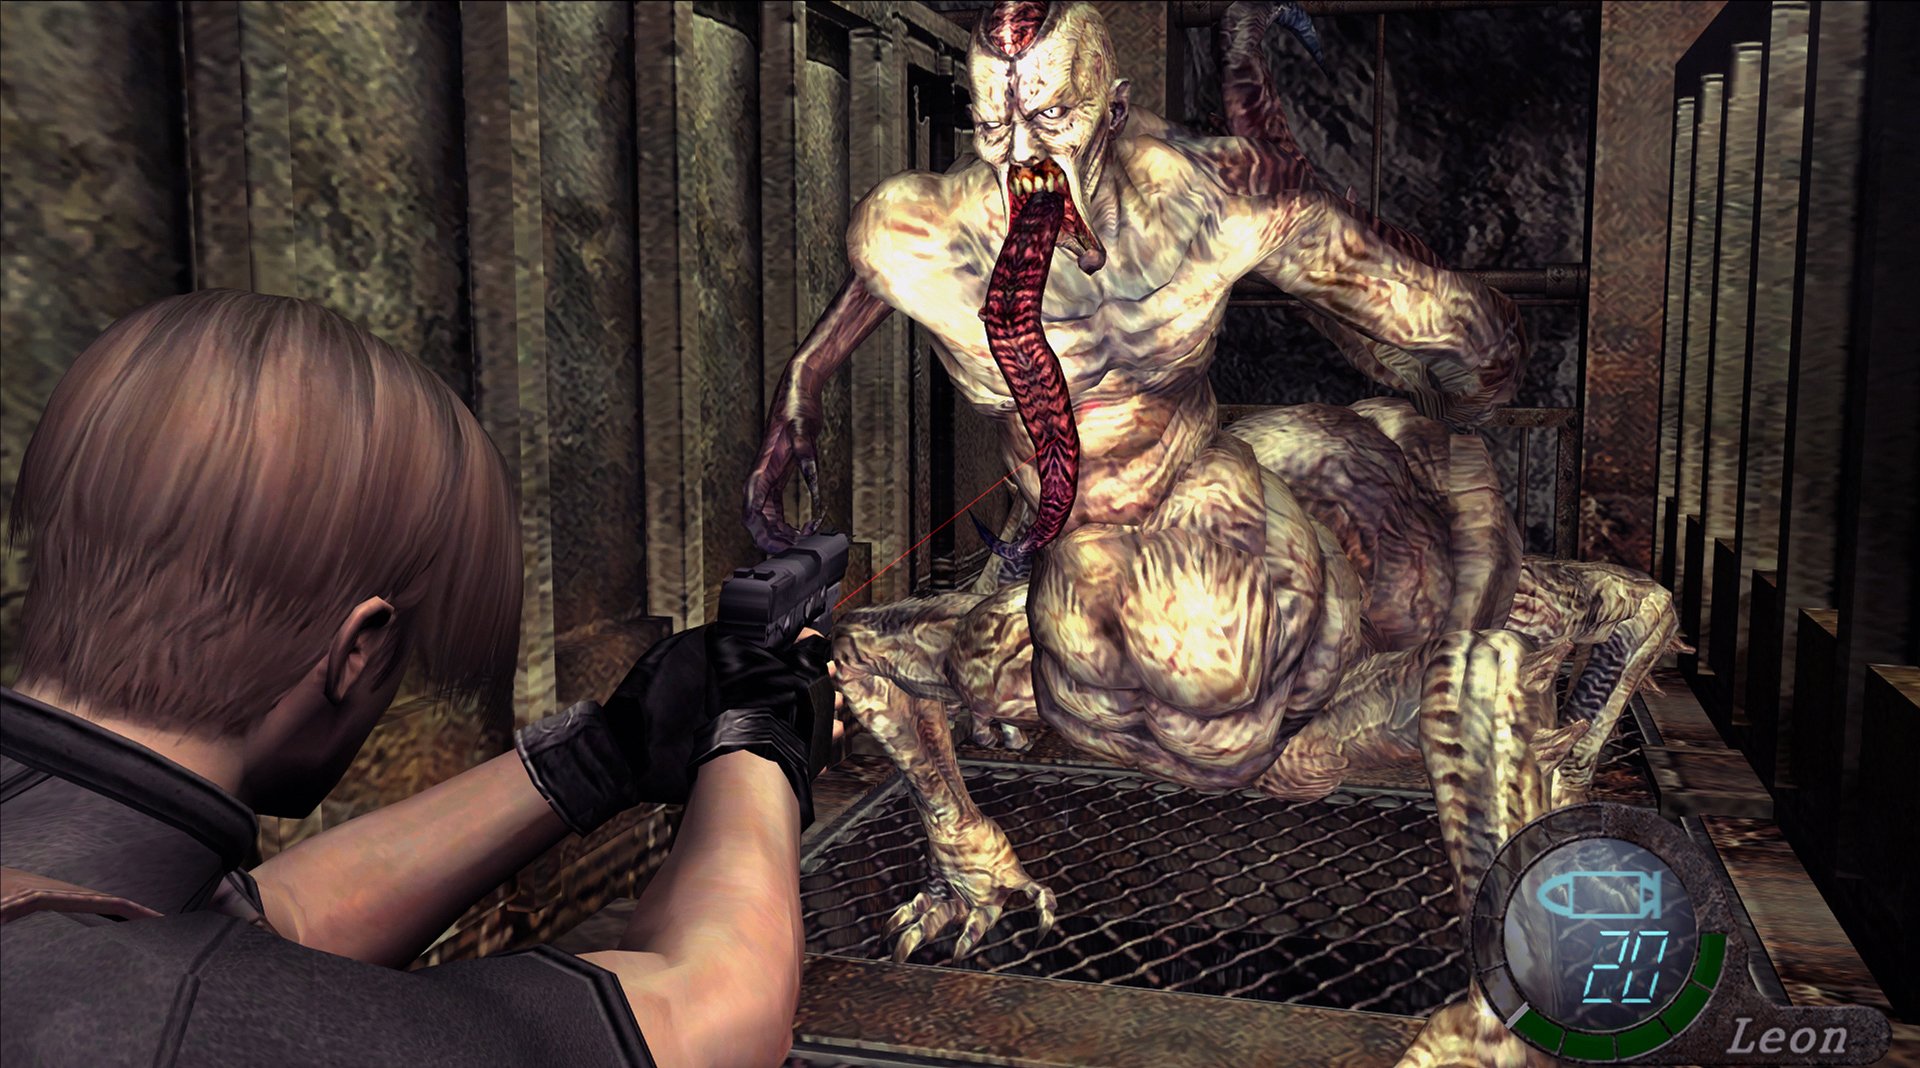 Steam resident evil 4 ultimate hd фото 26